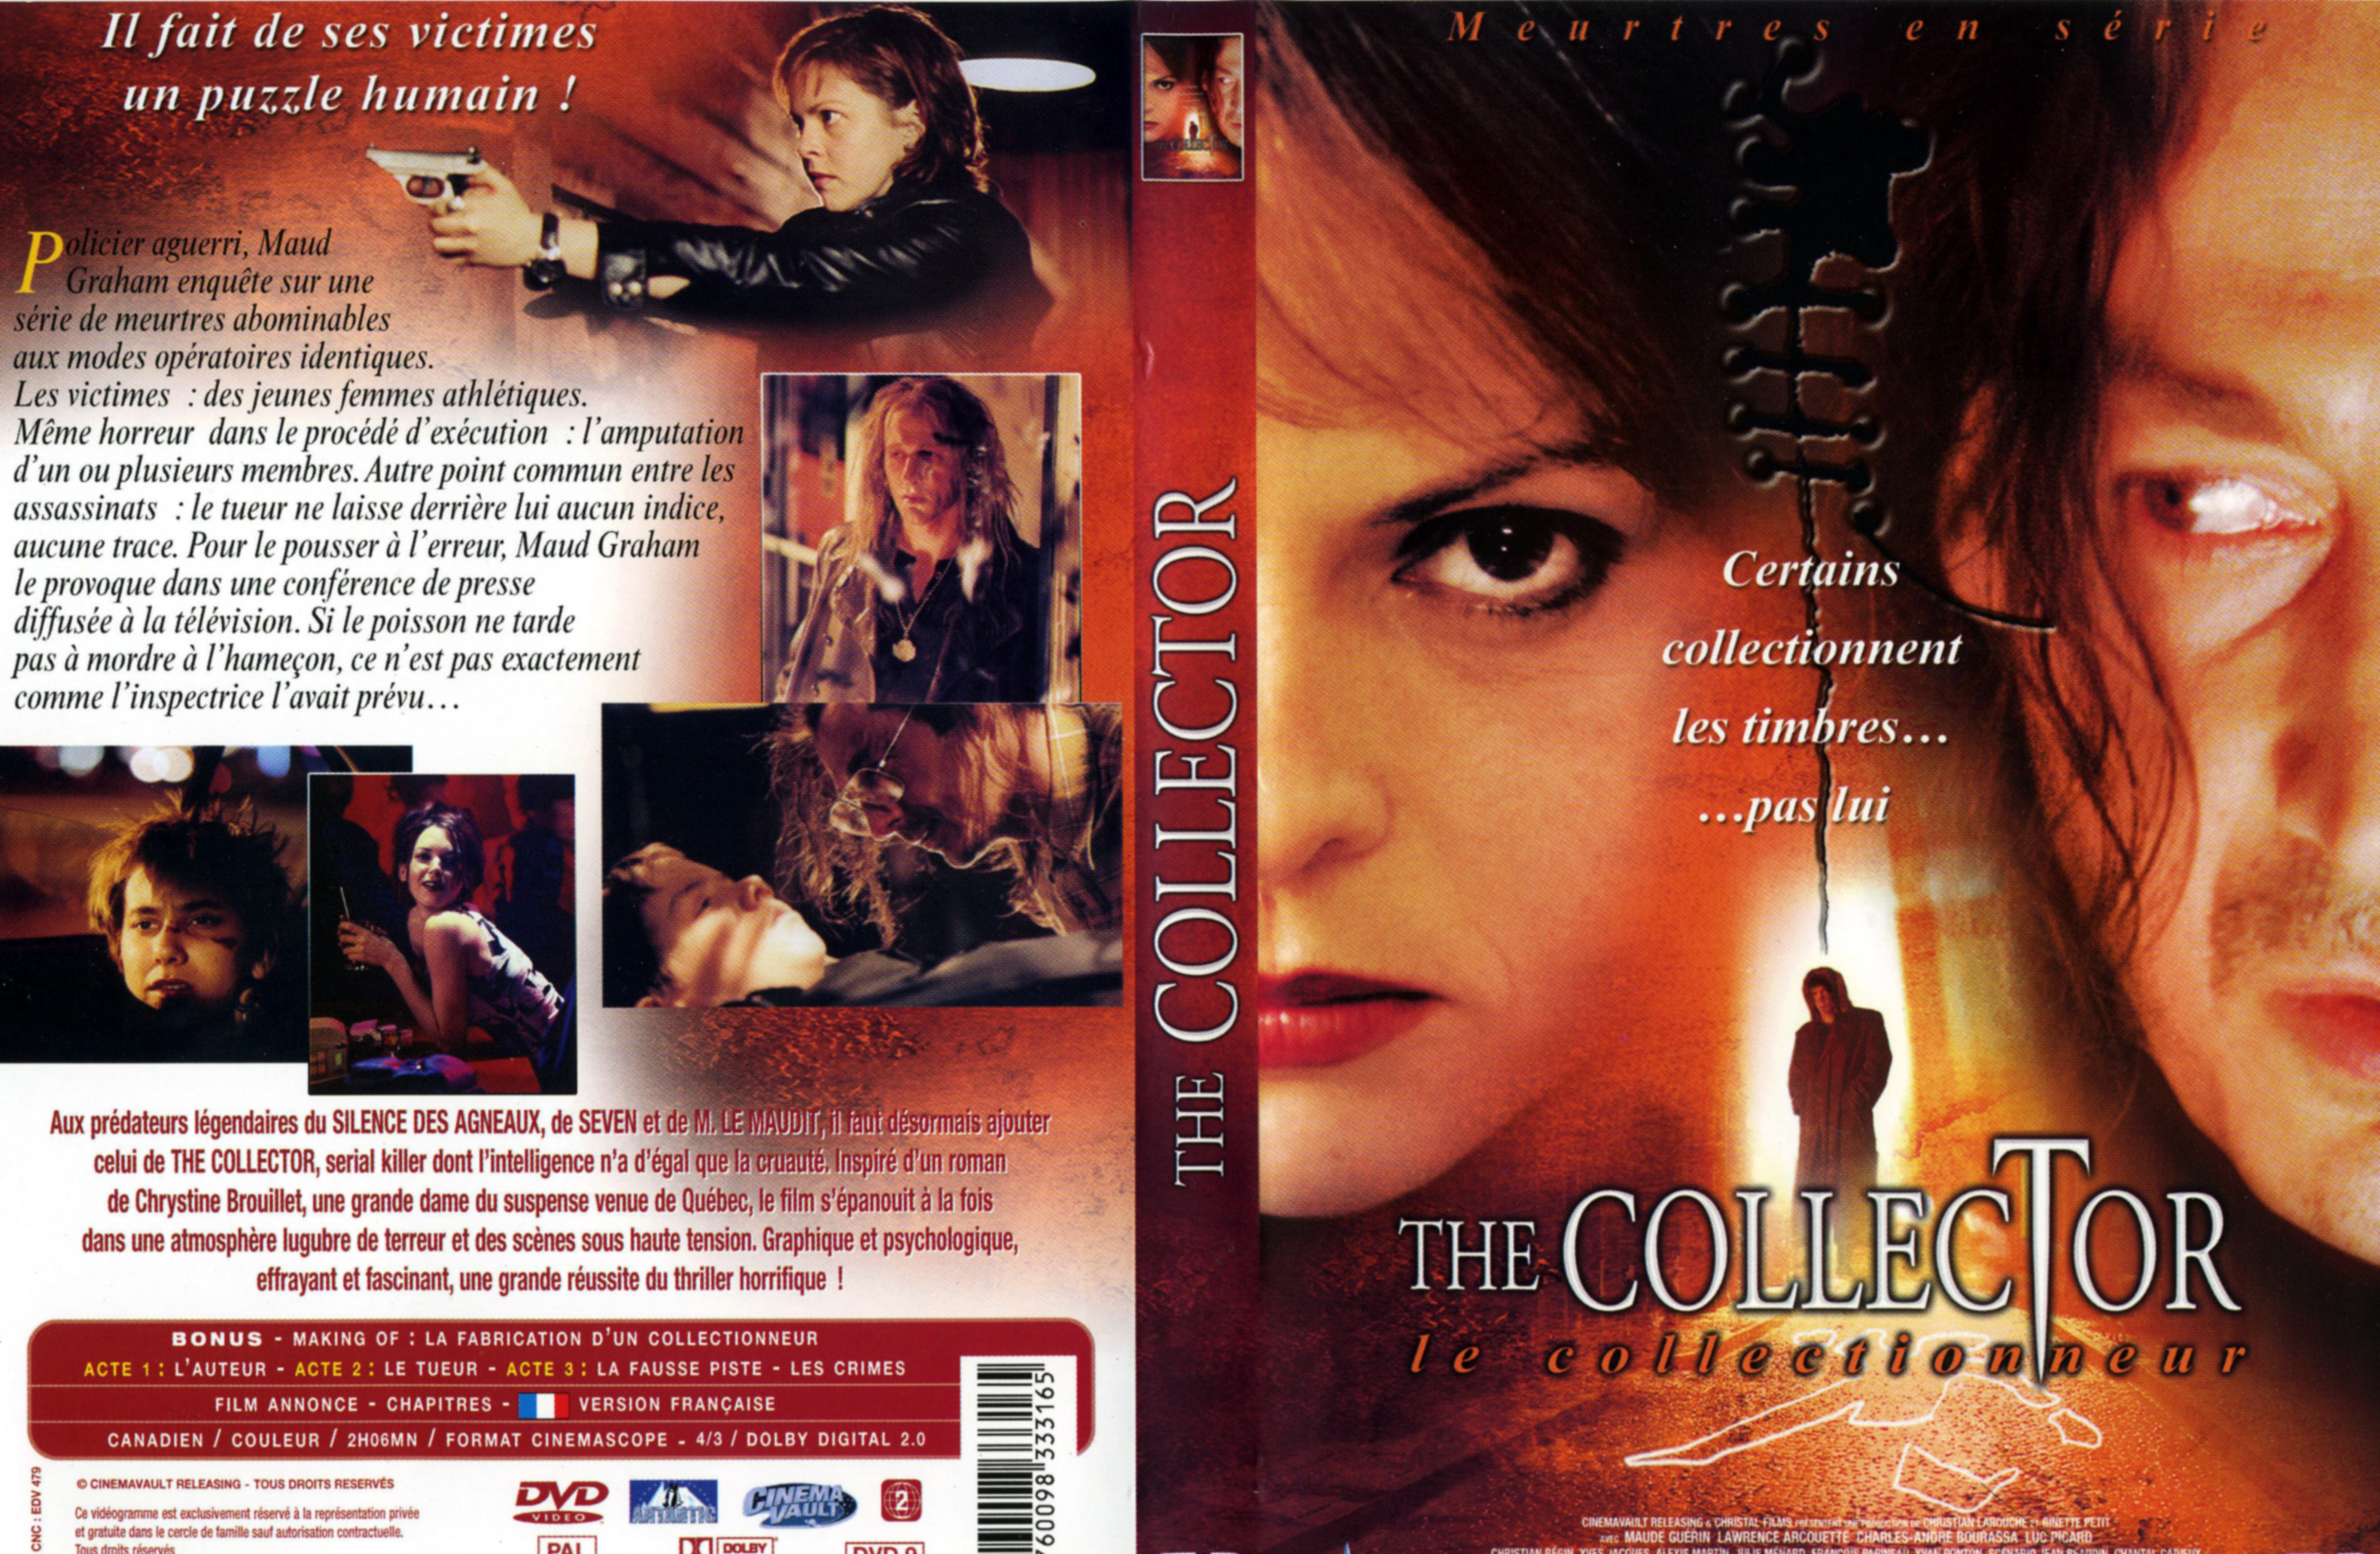 Jaquette DVD The collector